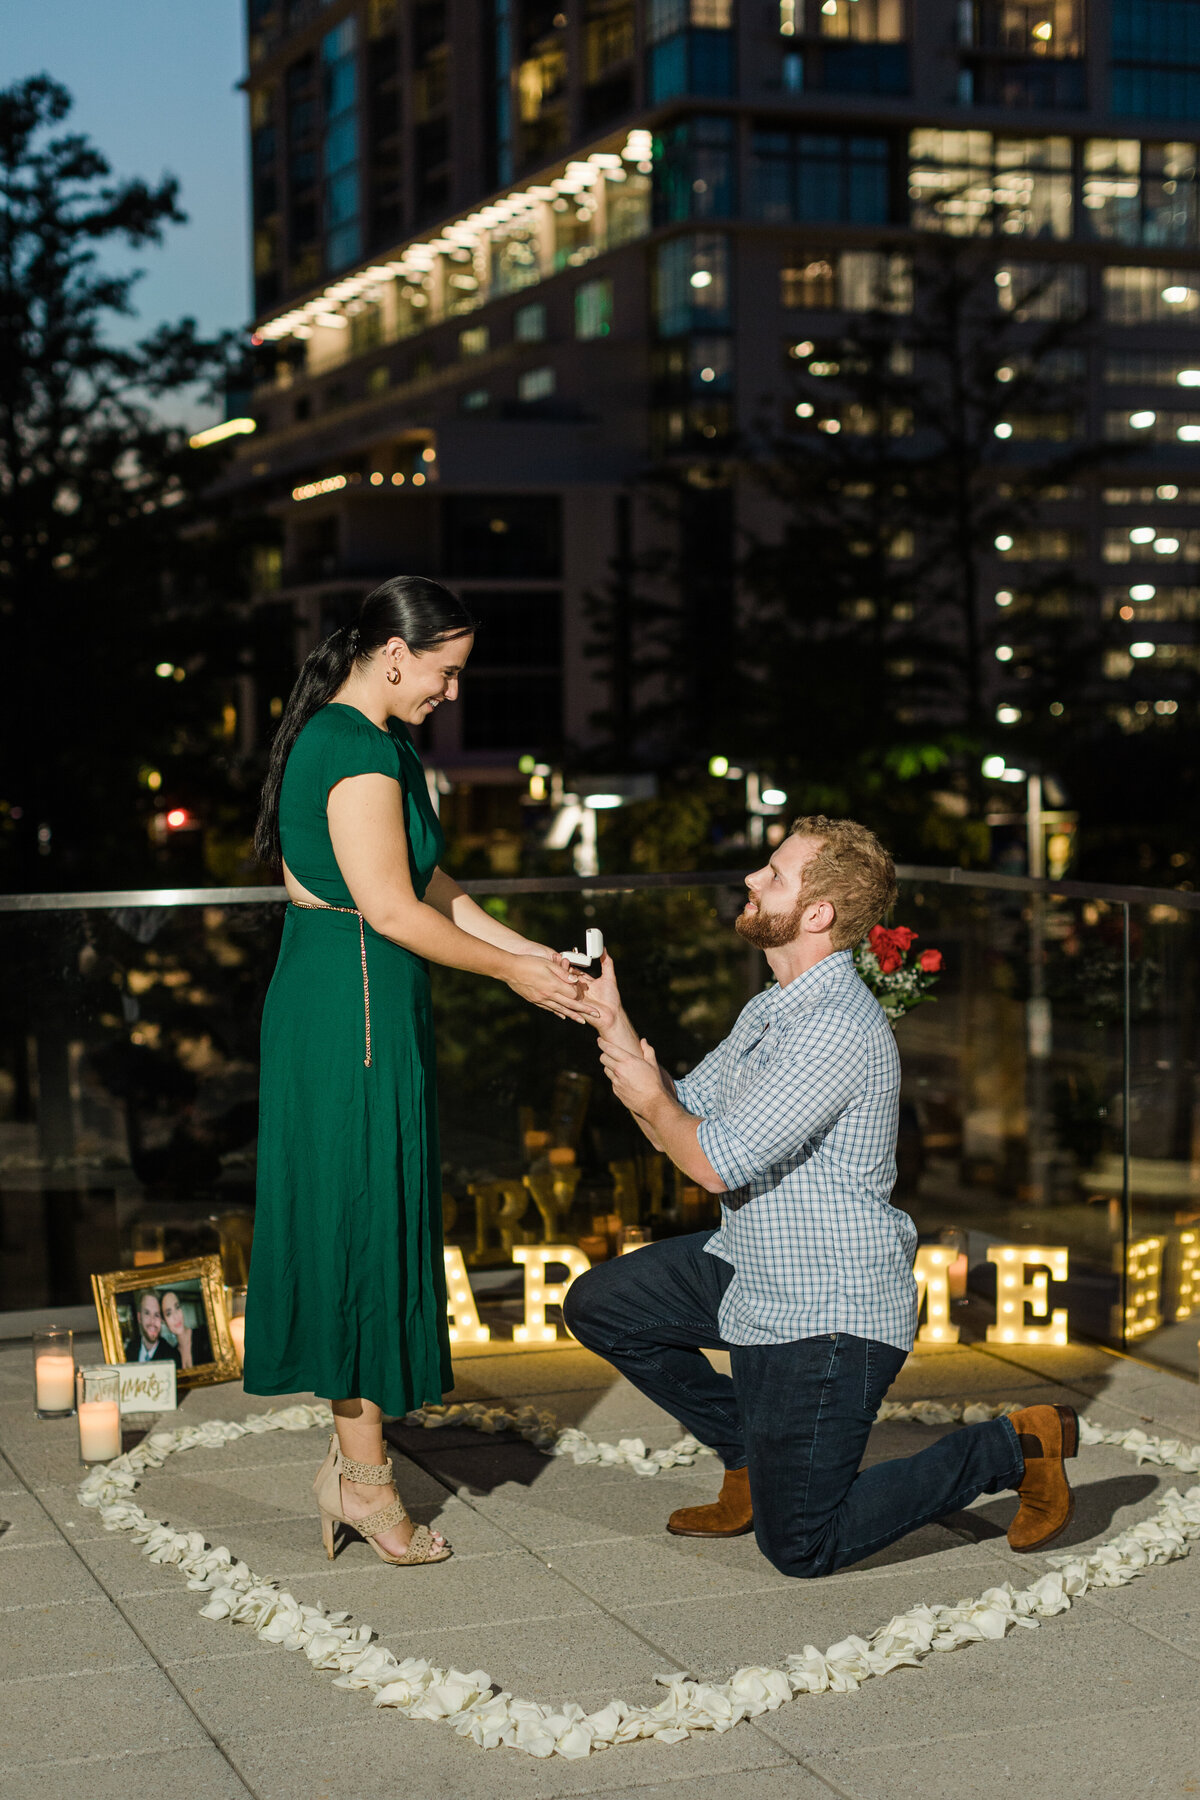 A photo of a man proposing to his future fiancé. The man is down on one knee with the engagement ring, and the couple is surrounded by a heart shaped ring of flower pedals as well as photos, candles, and light up letters that say "Marry Me" in the background. The woman on the left is wearing a green dress and high heels while the man on the right is wearing a blue and white checkered dress shirt and jeans.